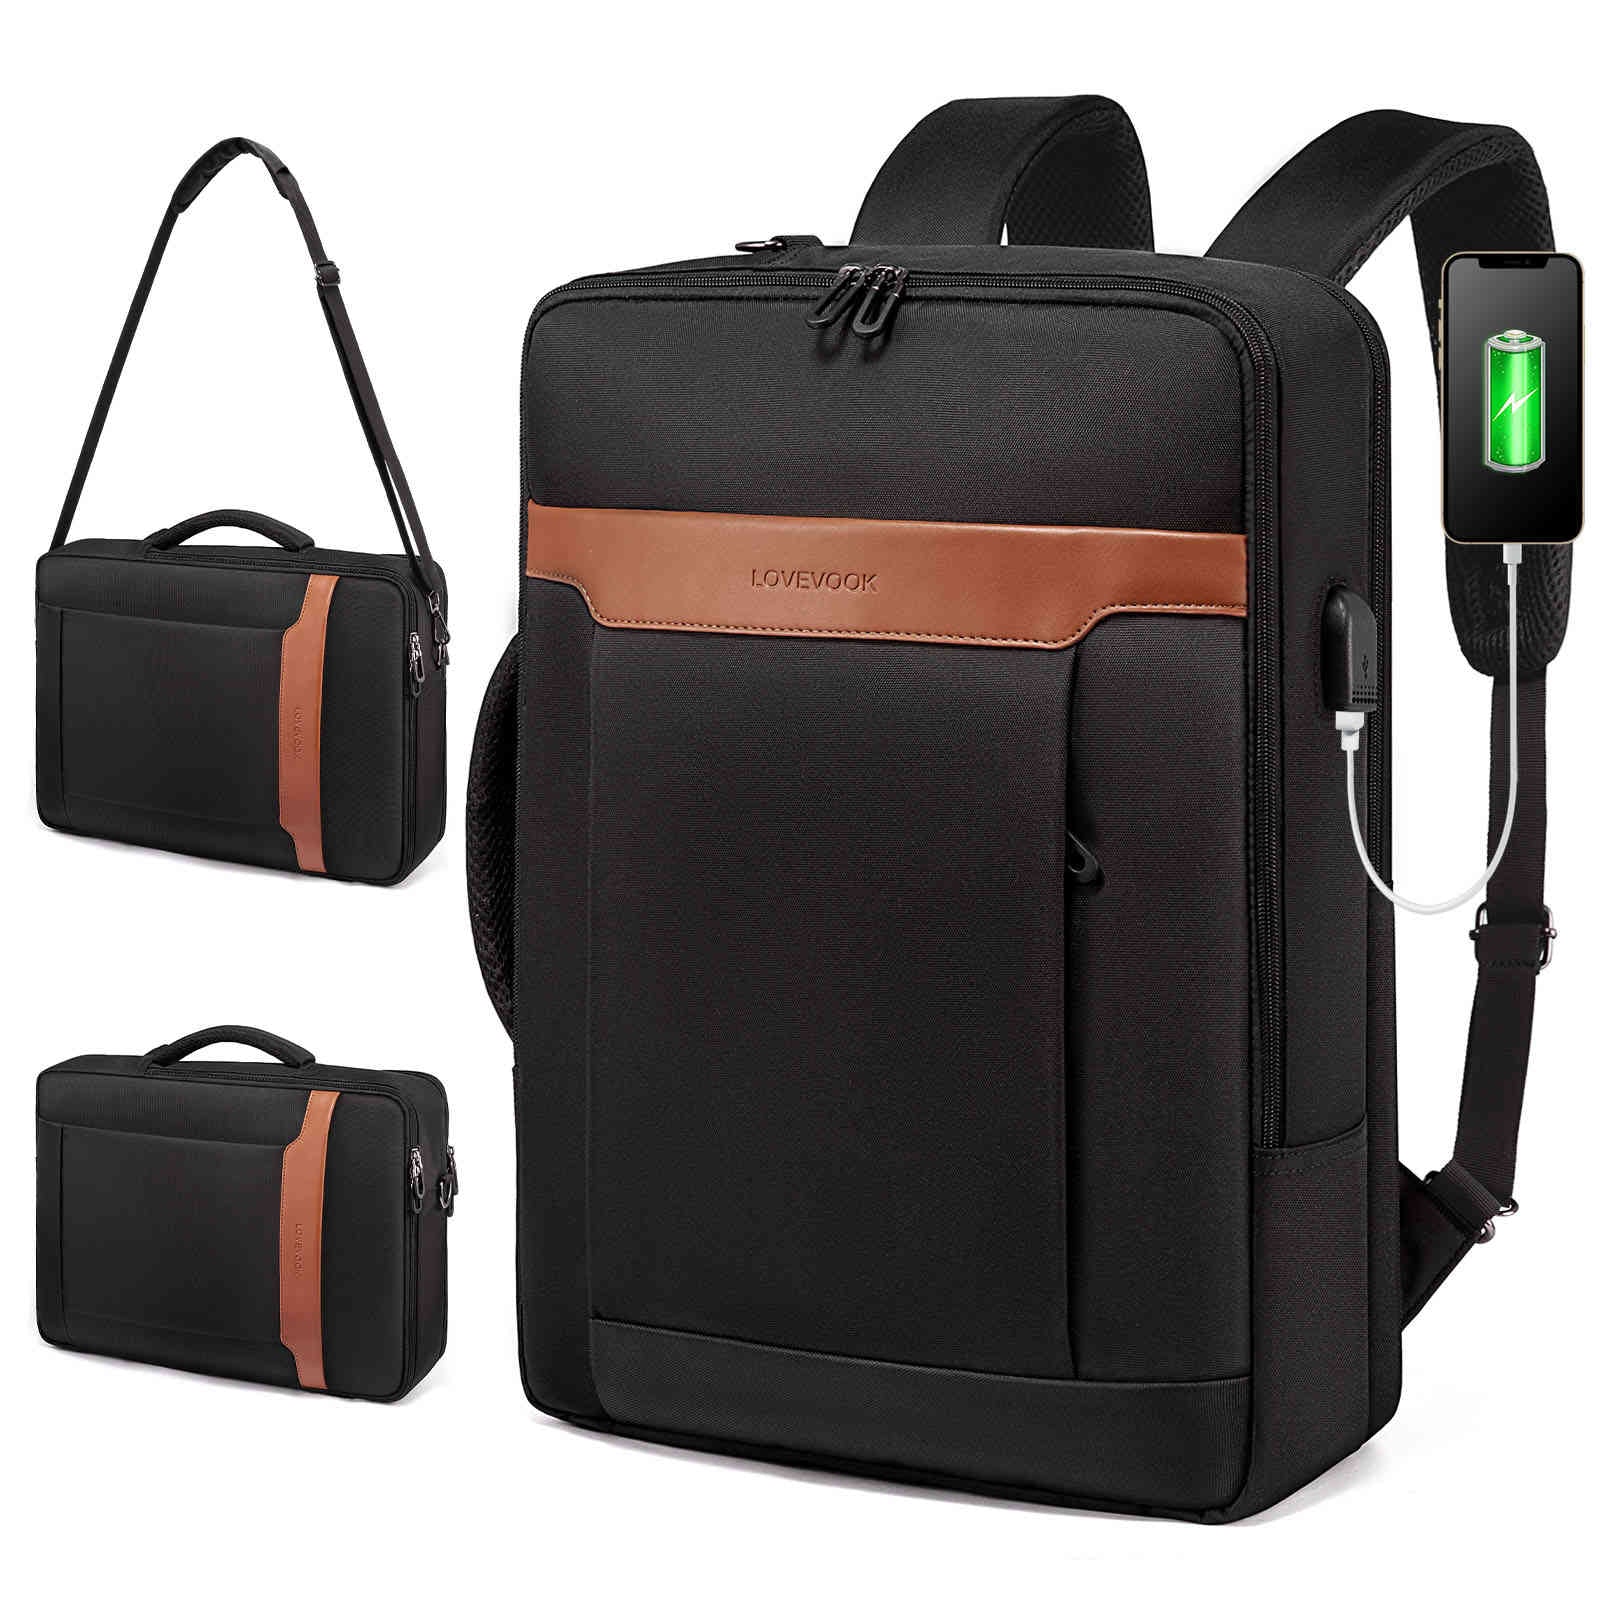 LOVEVOOK 3 in 1 Convertible Laptop Backpack Bag for Men, Fit 15.6 Inch ...